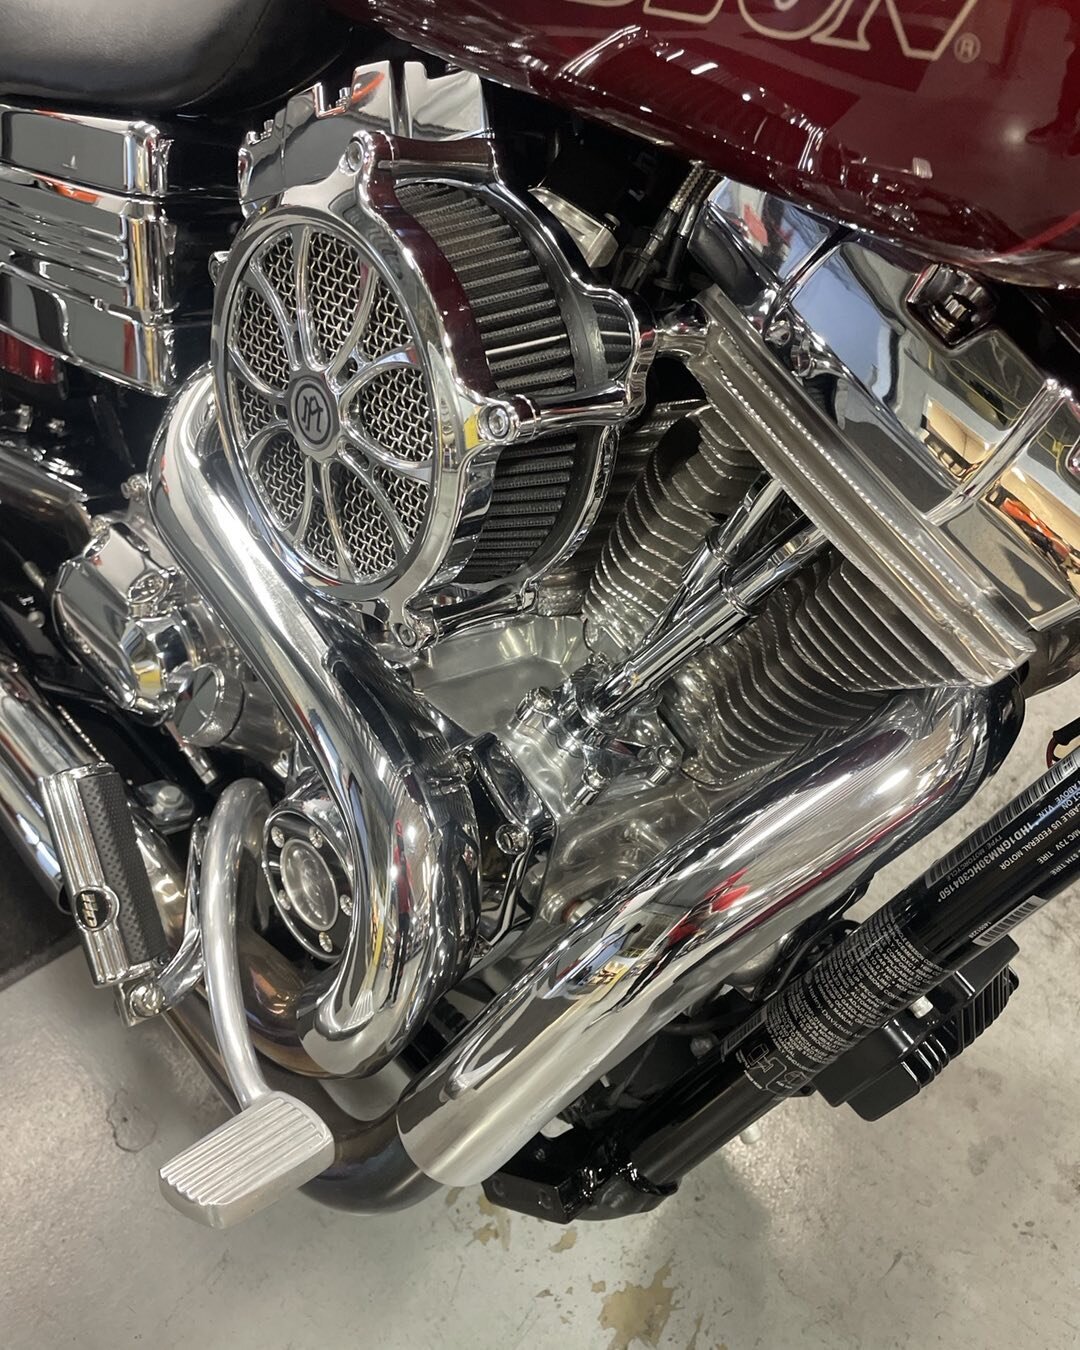 Hard2top mobile detail we believe in quality every time#roadglide#Roadking#CVO